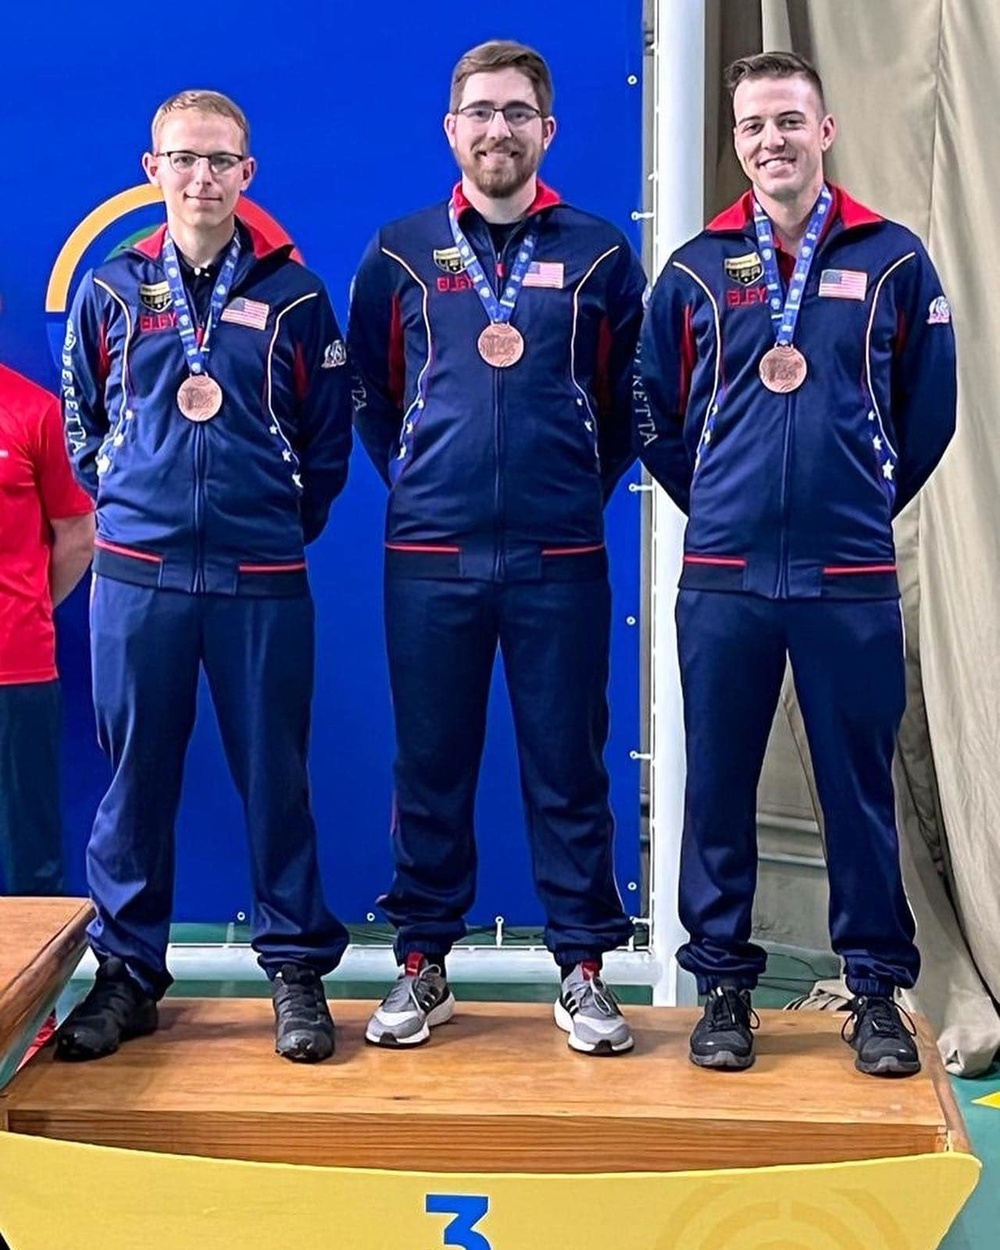 Team USA Wins Silver Medal in Three Position Rifle Team event at World Cup Rio